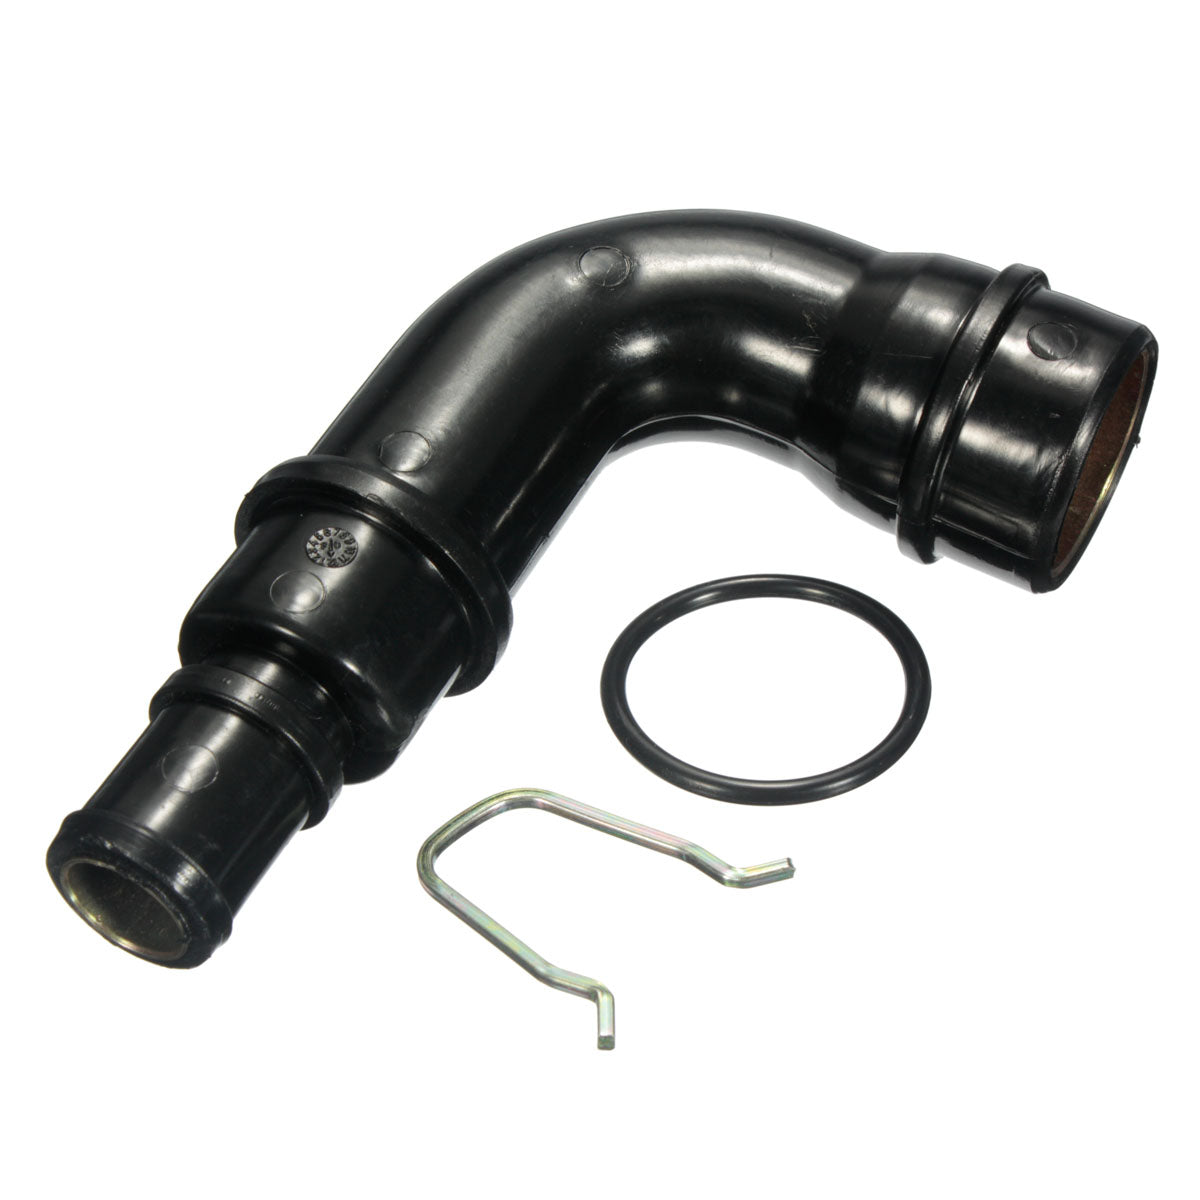 Black Breather Hose Pipe Tube Vacuum Vent With Clip &Seal For VW GOLF MK4 AUDI A3 1.8T